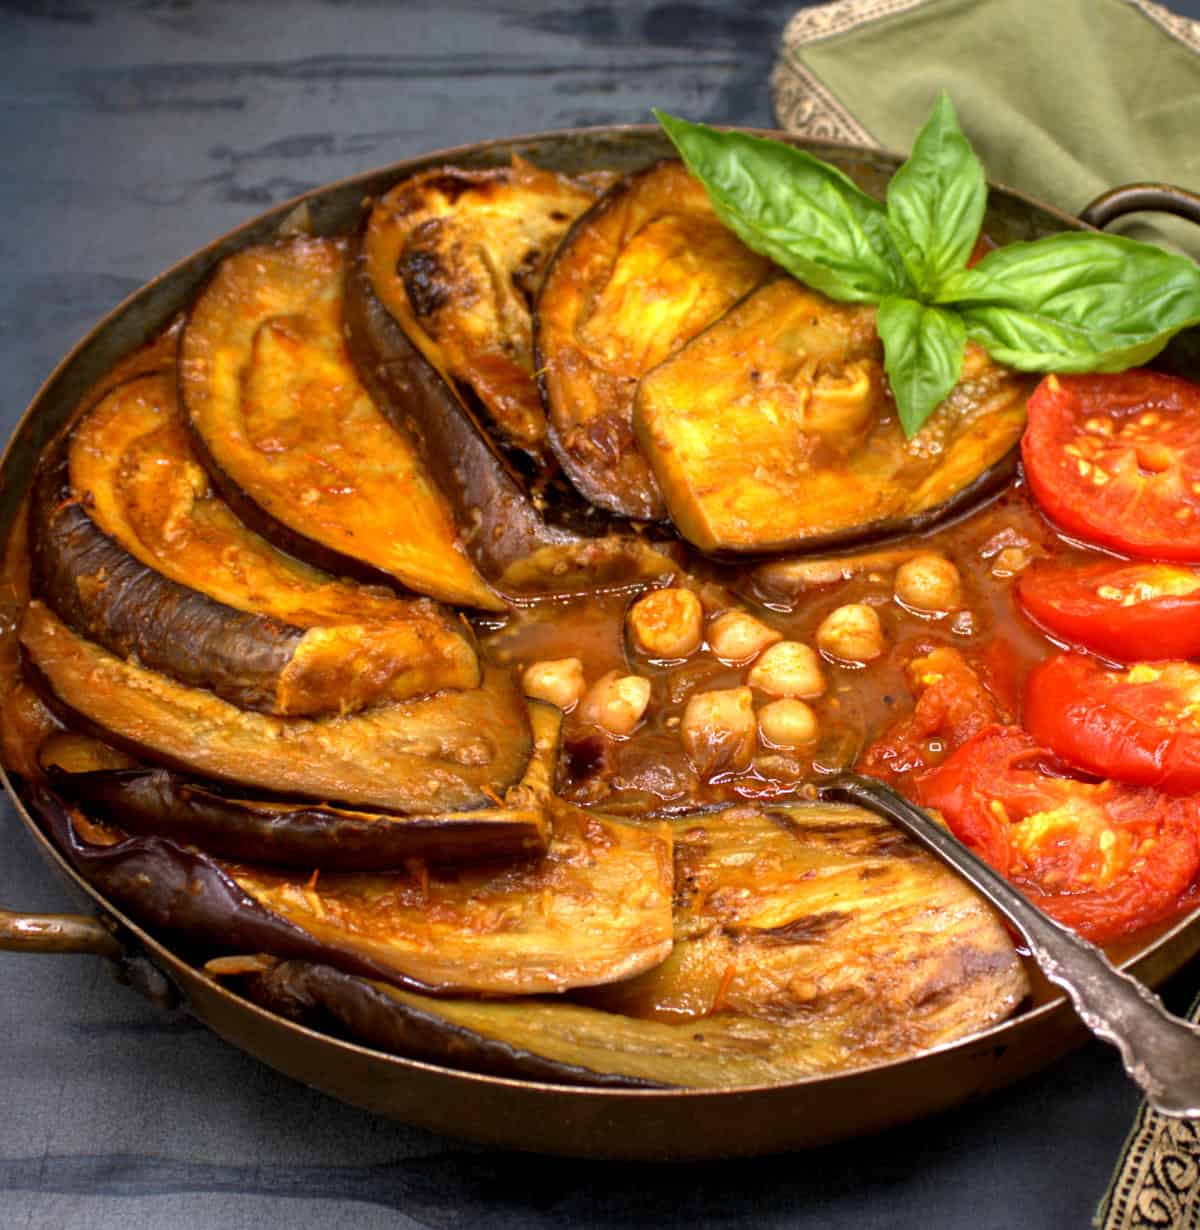 Khoresh bademjan in a copper pot with eggplant slices, tomatoes and basil garnish.